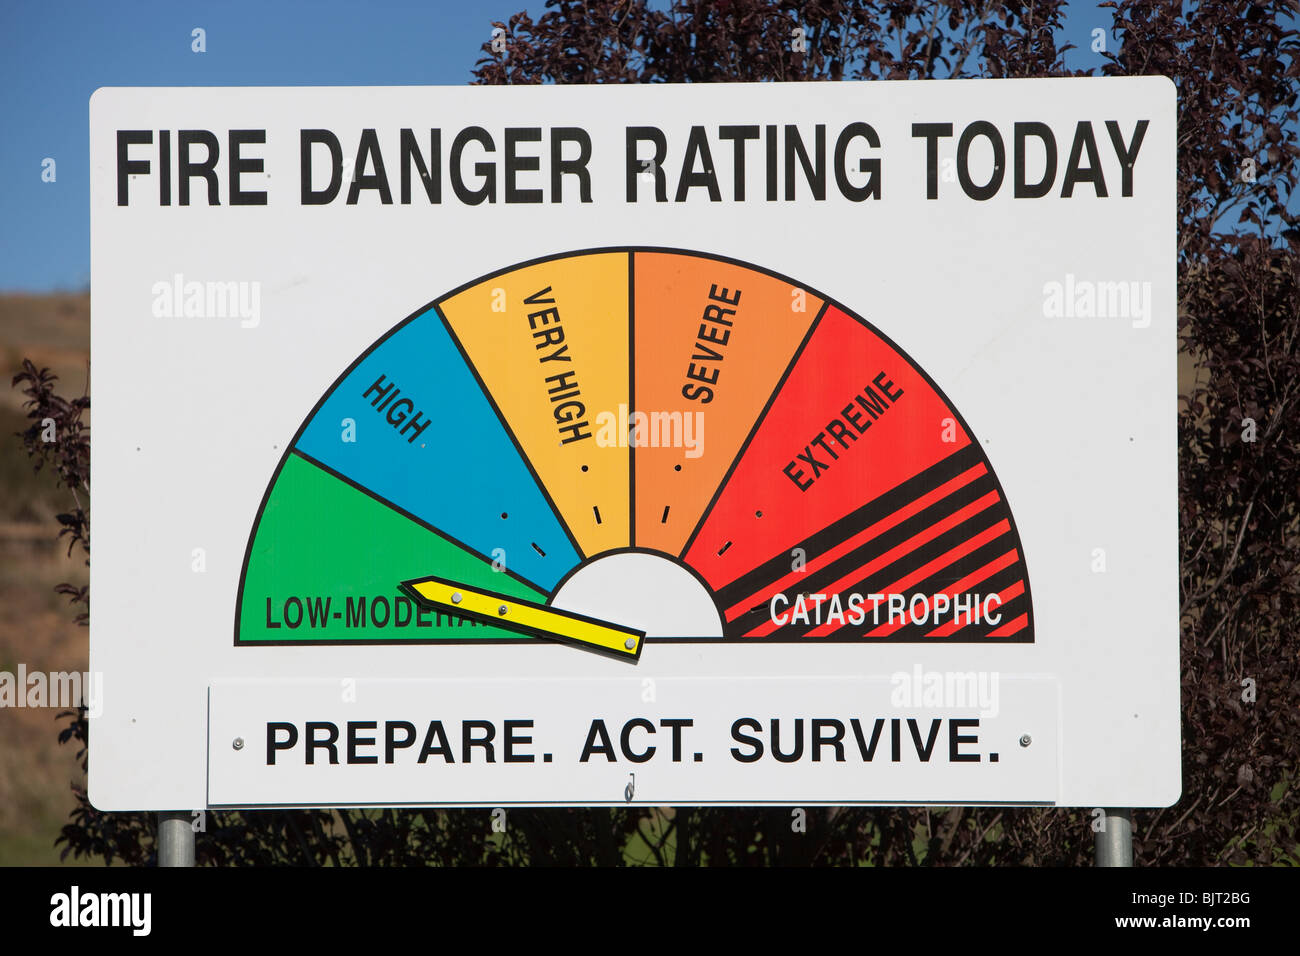 A fire danger rating sign at Michelago in New South Wales, Australia. Stock Photo